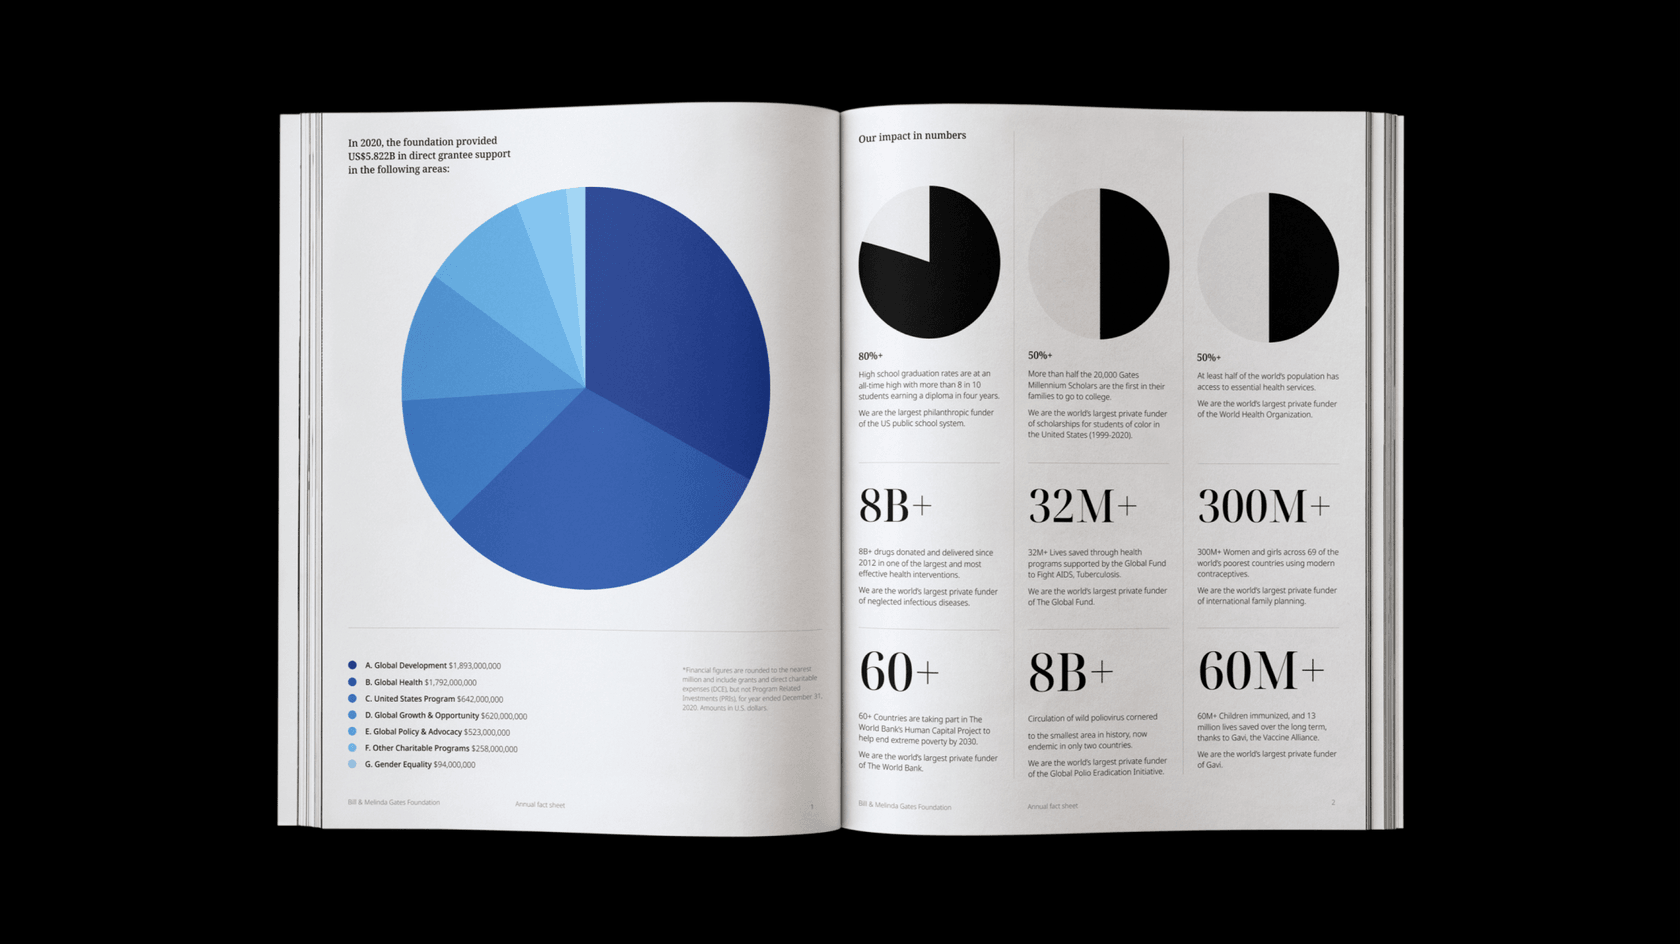 Printed report with open pages showing pie charts and numbers.